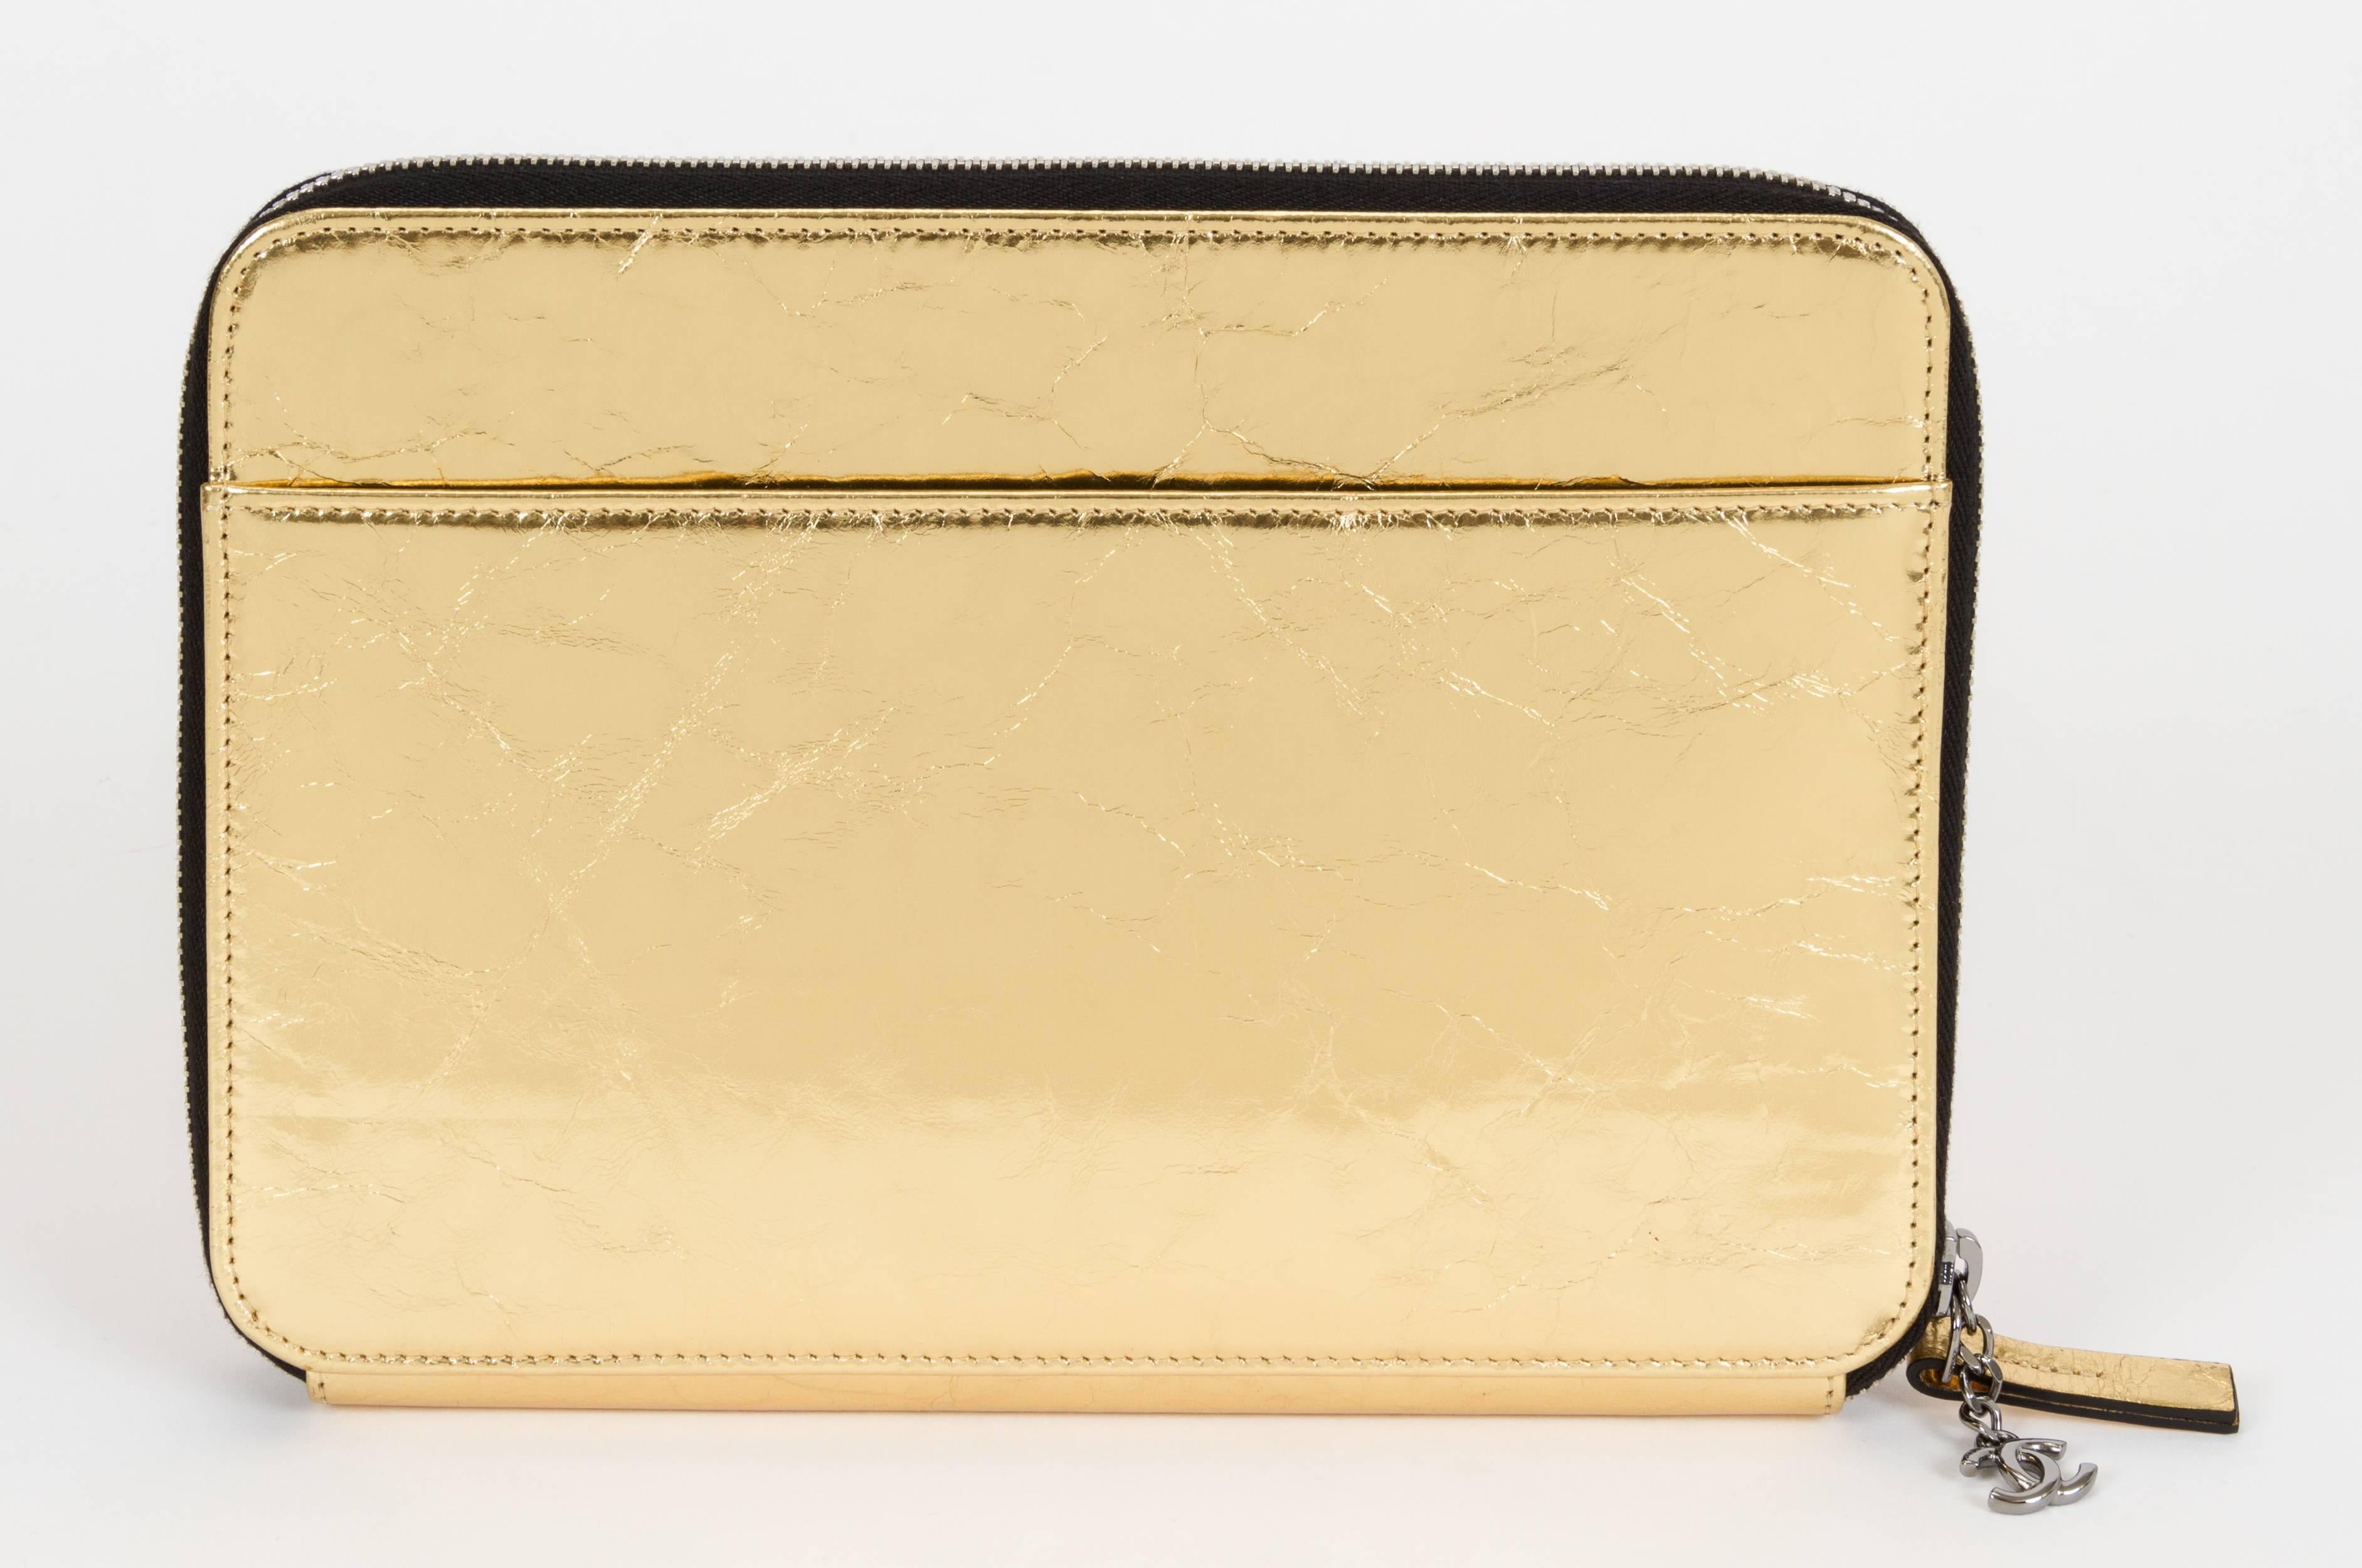 Chanel Limited Edition Votez Coco Gold Clutch In Excellent Condition For Sale In West Hollywood, CA